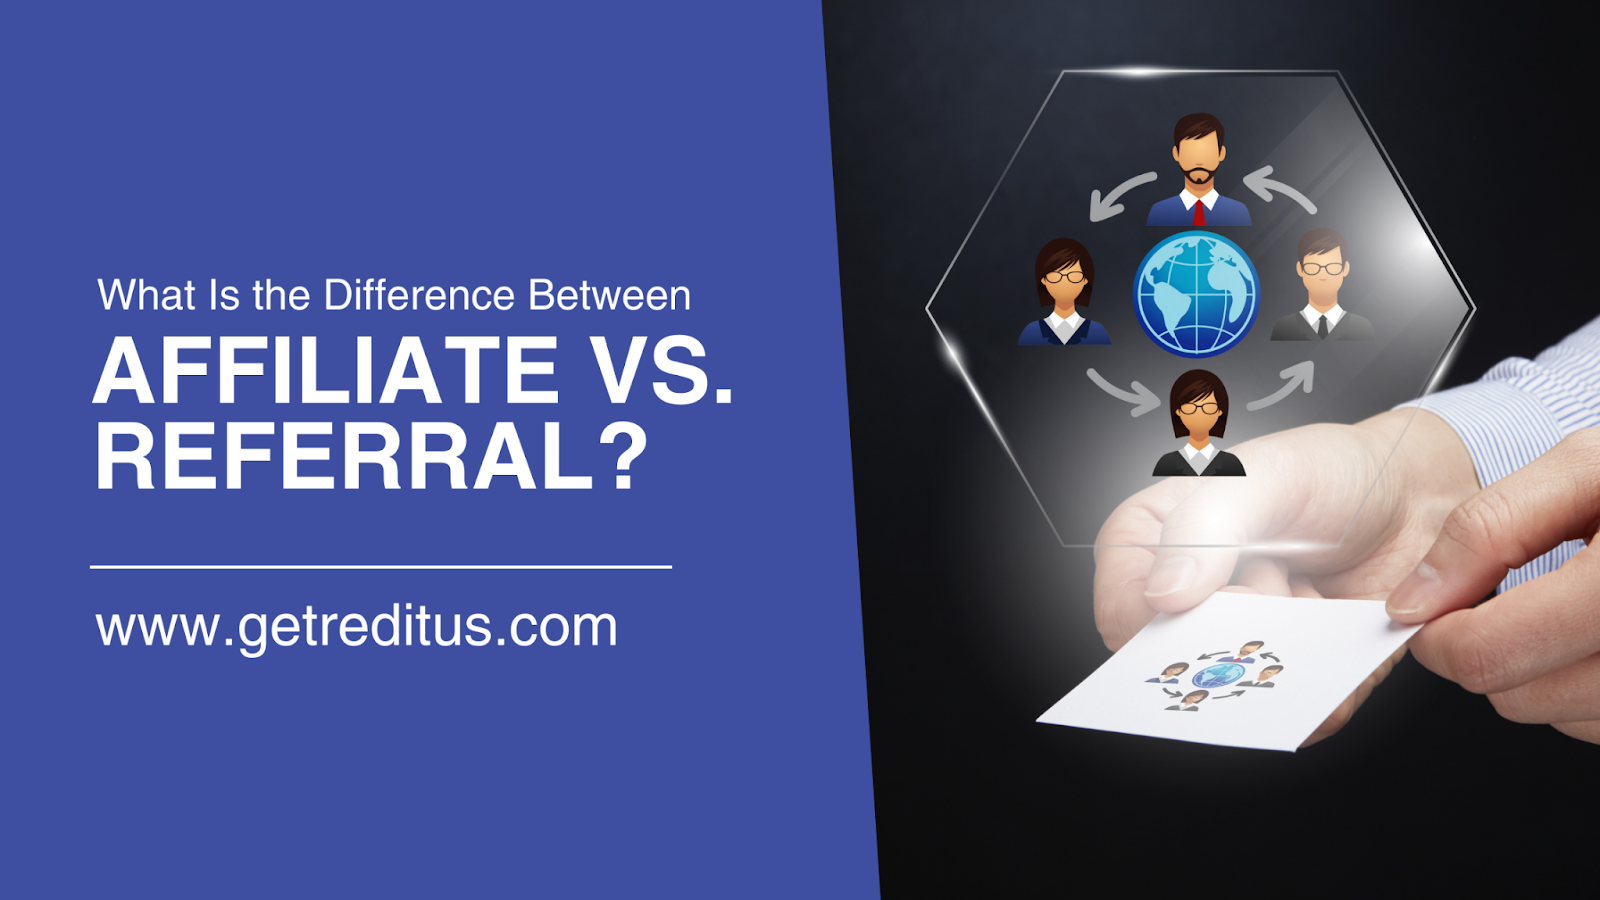 Affiliate vs Referral: Which is Best for Your Business?